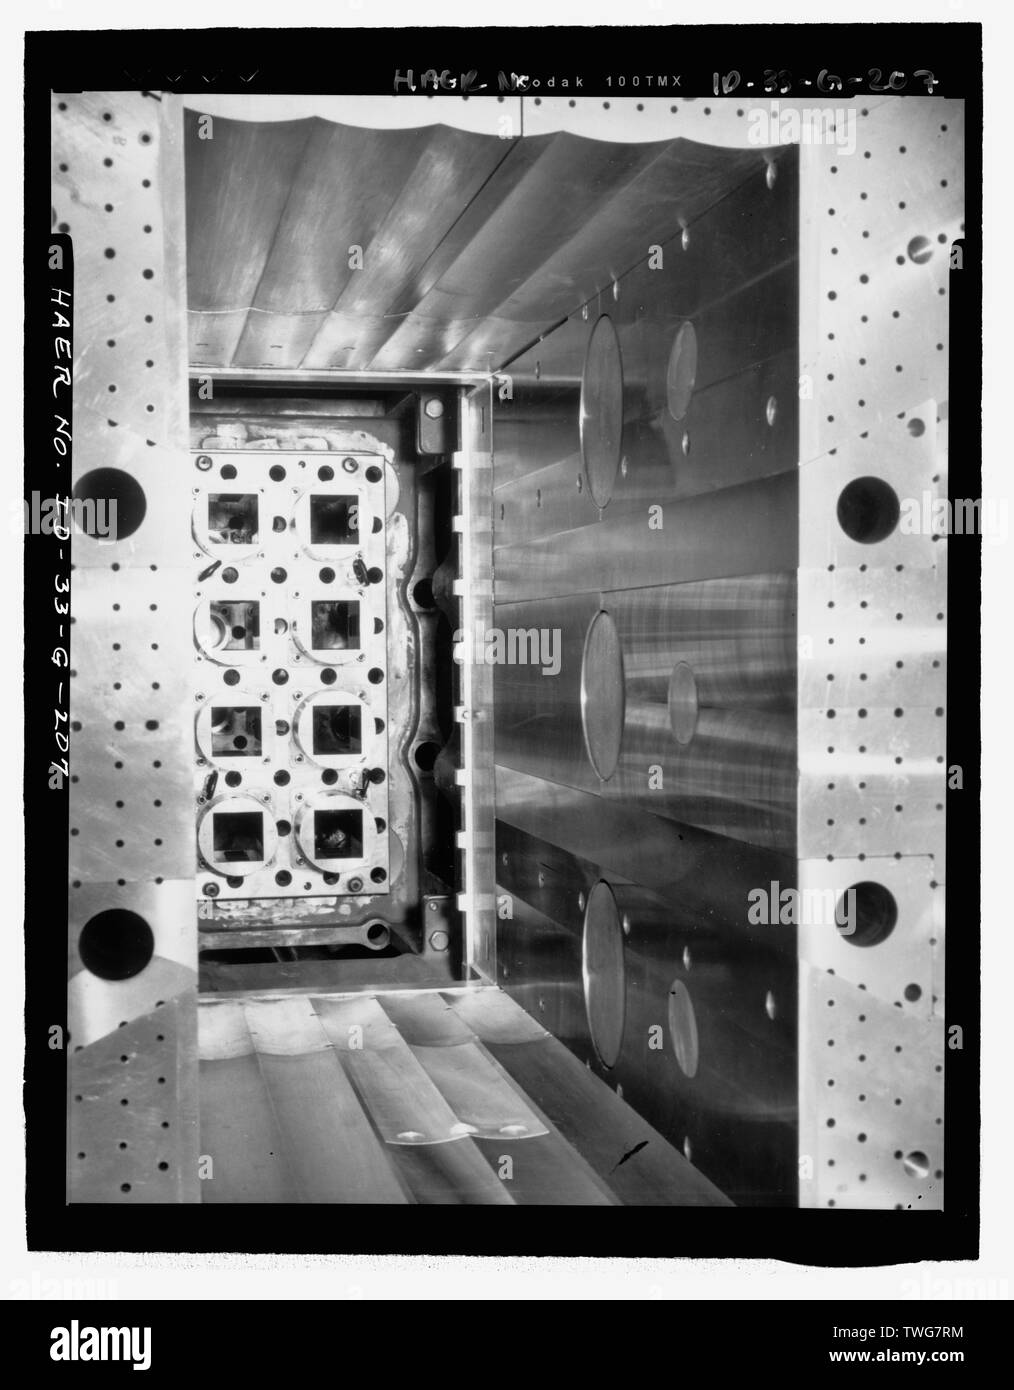 REACTOR CORE SURROUNDED BY BERYLLIUM MODERATOR. CAMERA LOOKS DOWN AND TOWARD NORTH INTO LOWER GRID CASTING. HOLES OF VARIOUS SIZES ACCOMMODATE COOLANT WATER AND EXPERIMENTAL POSITIONS. INL NEGATIVE NO. 4197.; Unknown Photographer, 2-11-1952 - Idaho National Engineering Laboratory, Test Reactor Area, Materials and Engineering Test Reactors, Scoville, Butte County, ID Stock Photo